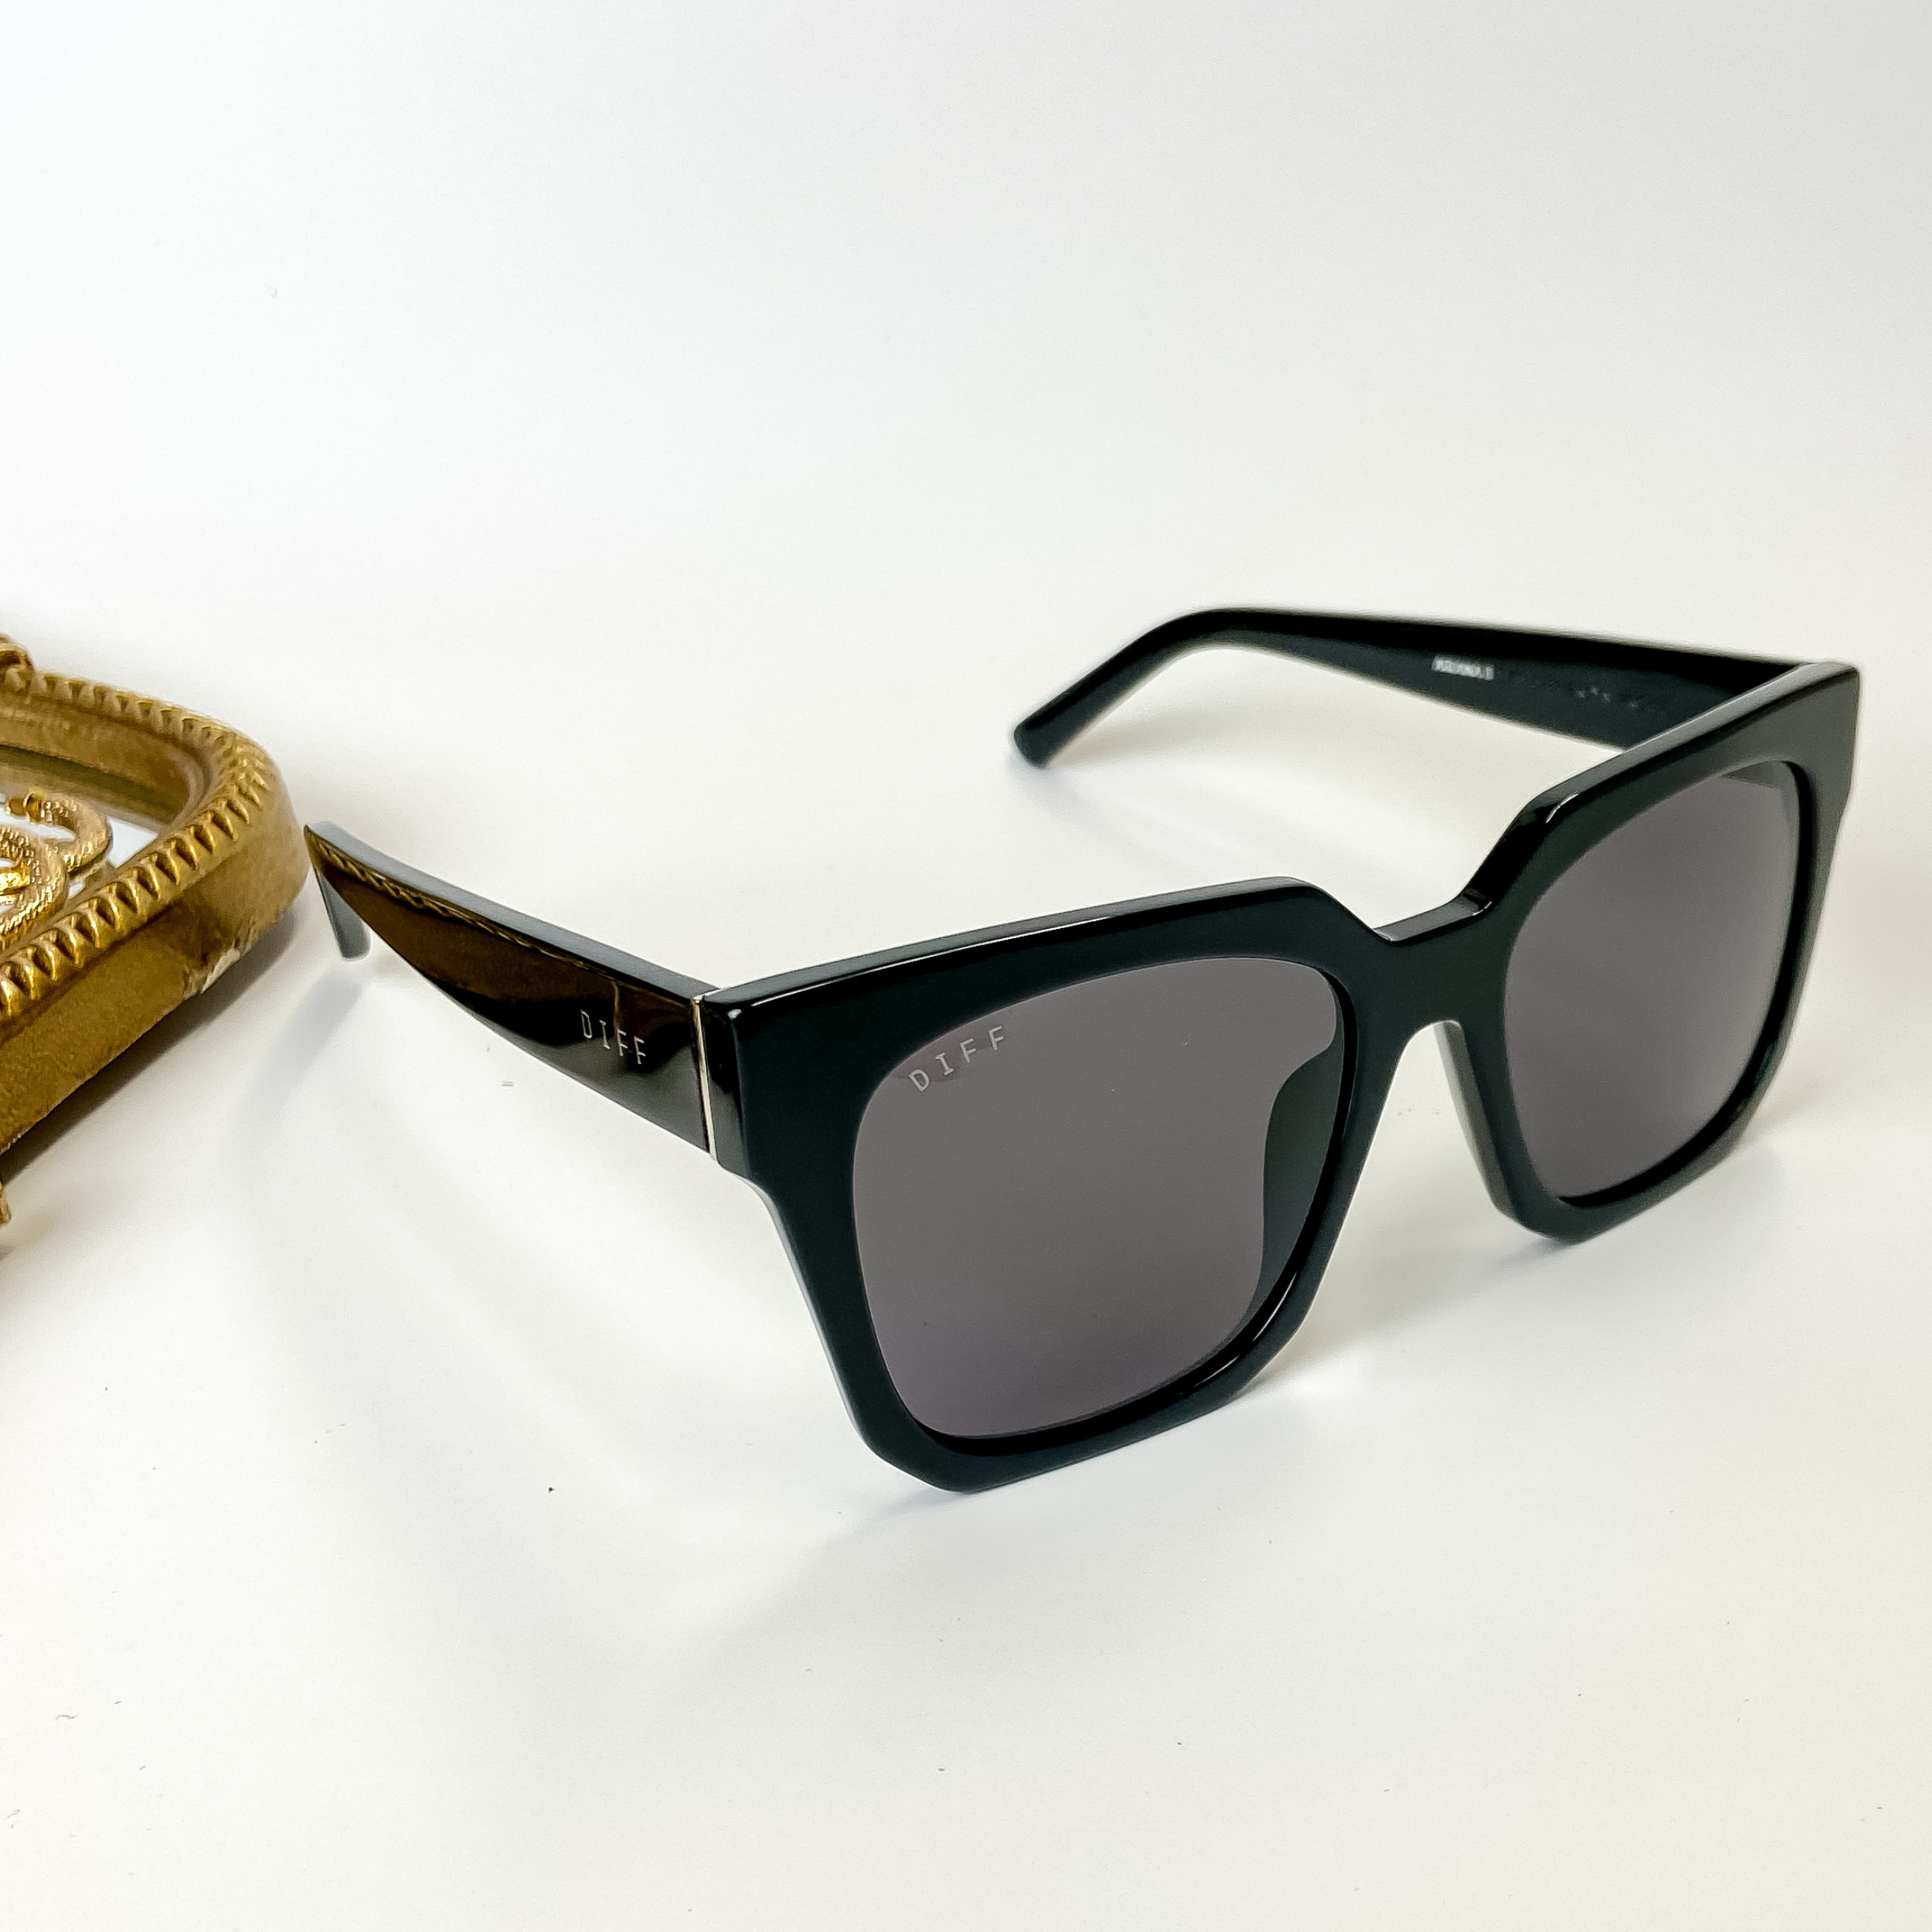 A pair of square black sunglasses with grey lenses pictured on a white background with gold jewelry.